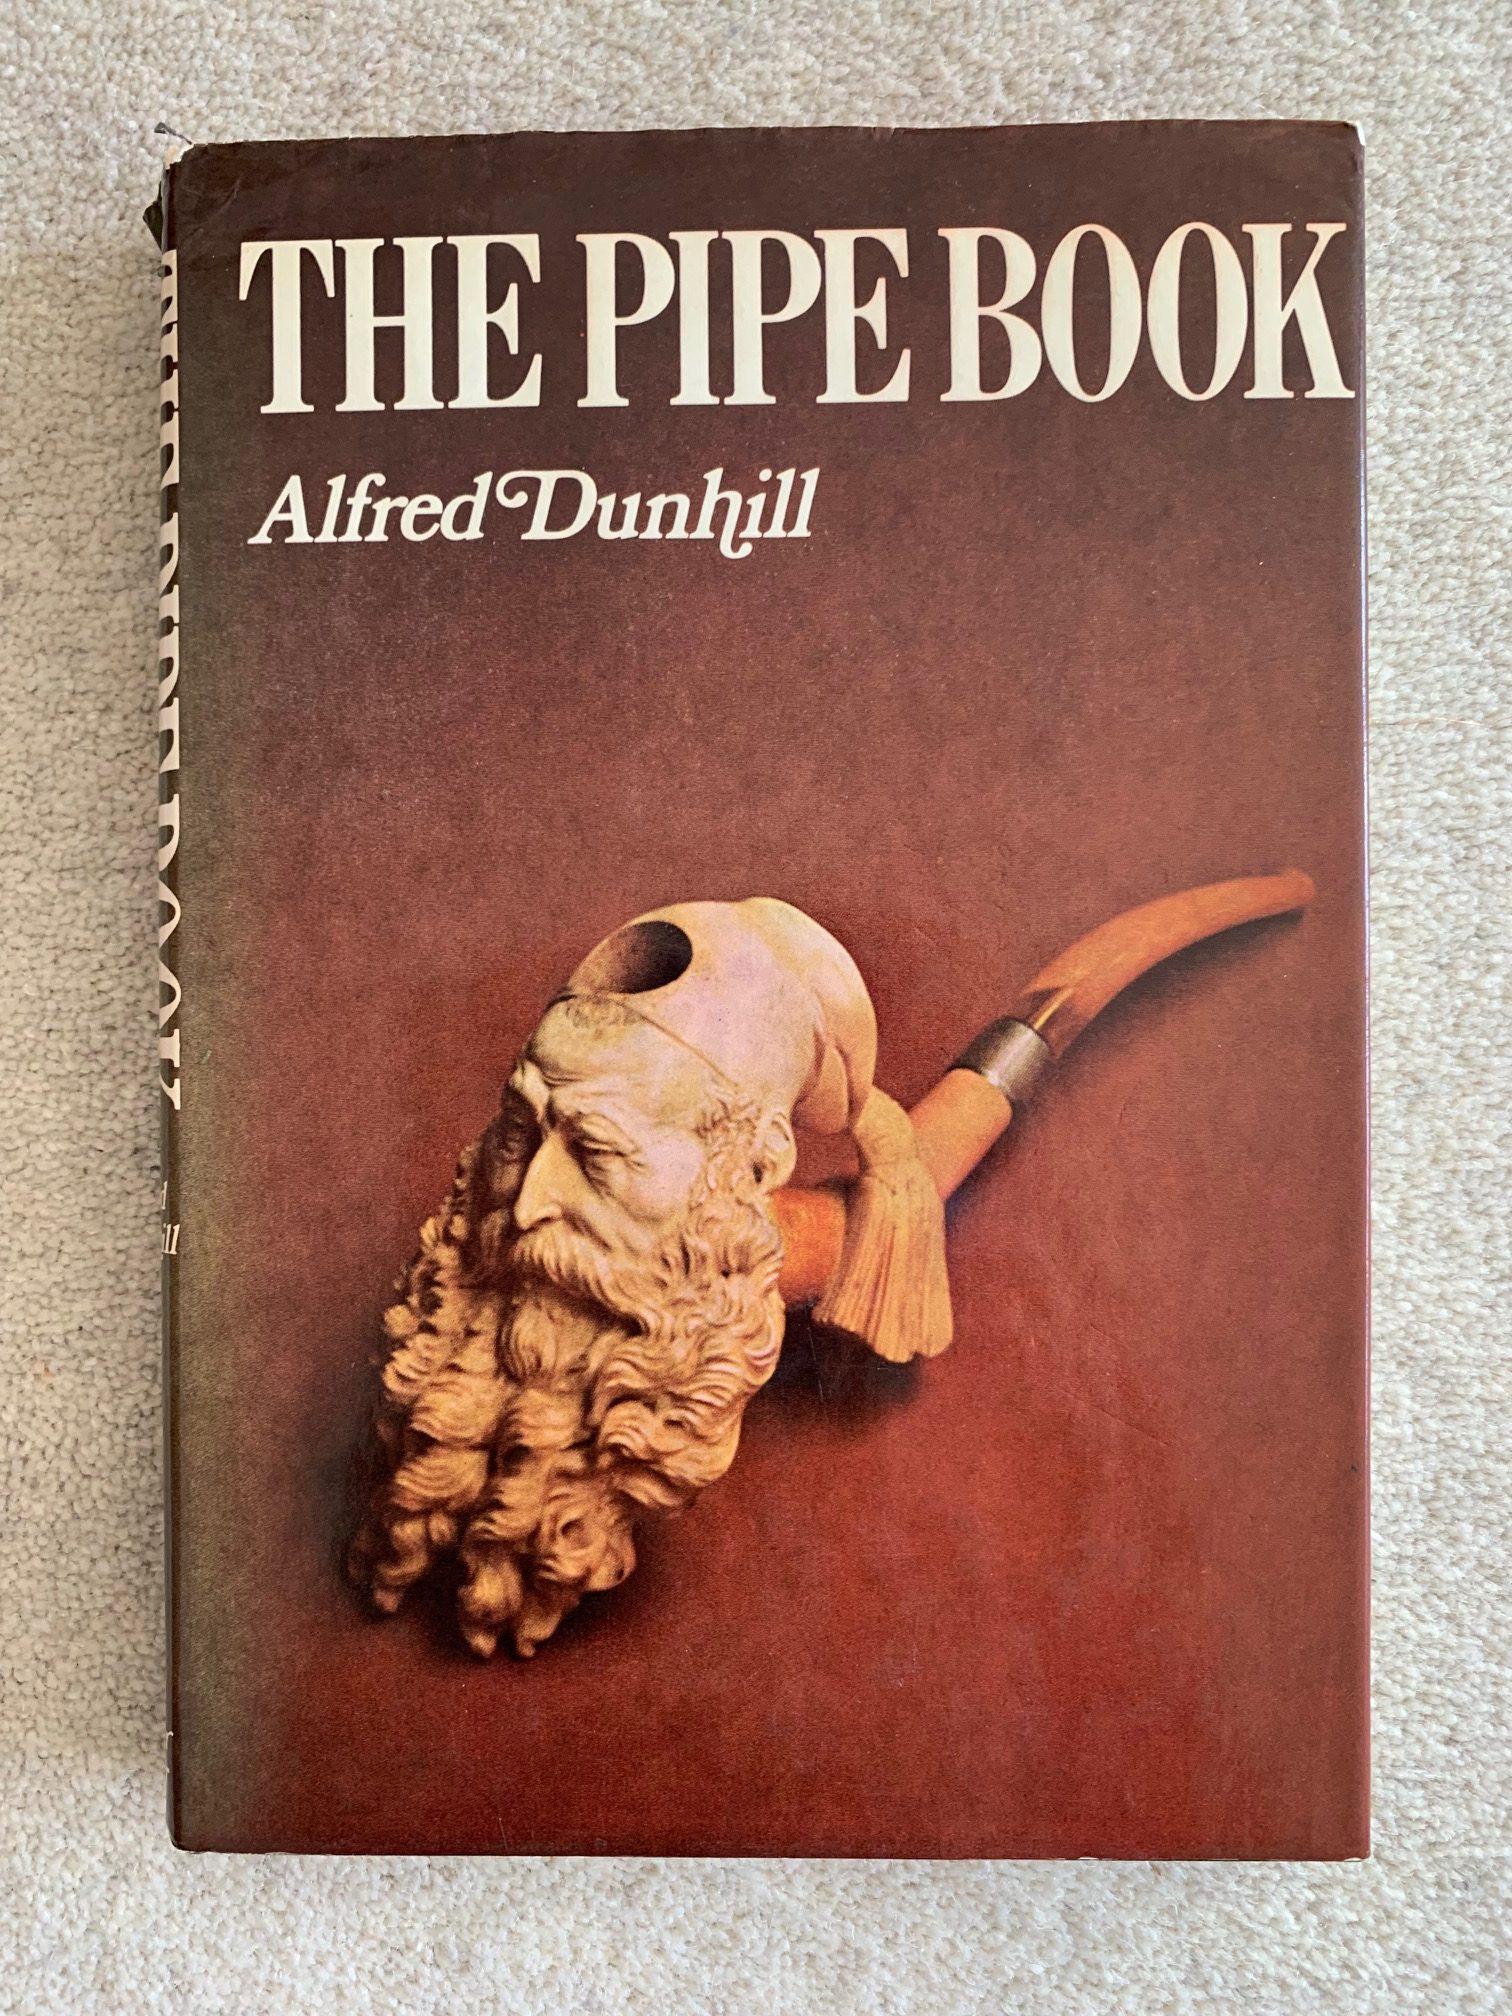 The Pipe Book - Alfred Dunhill Image